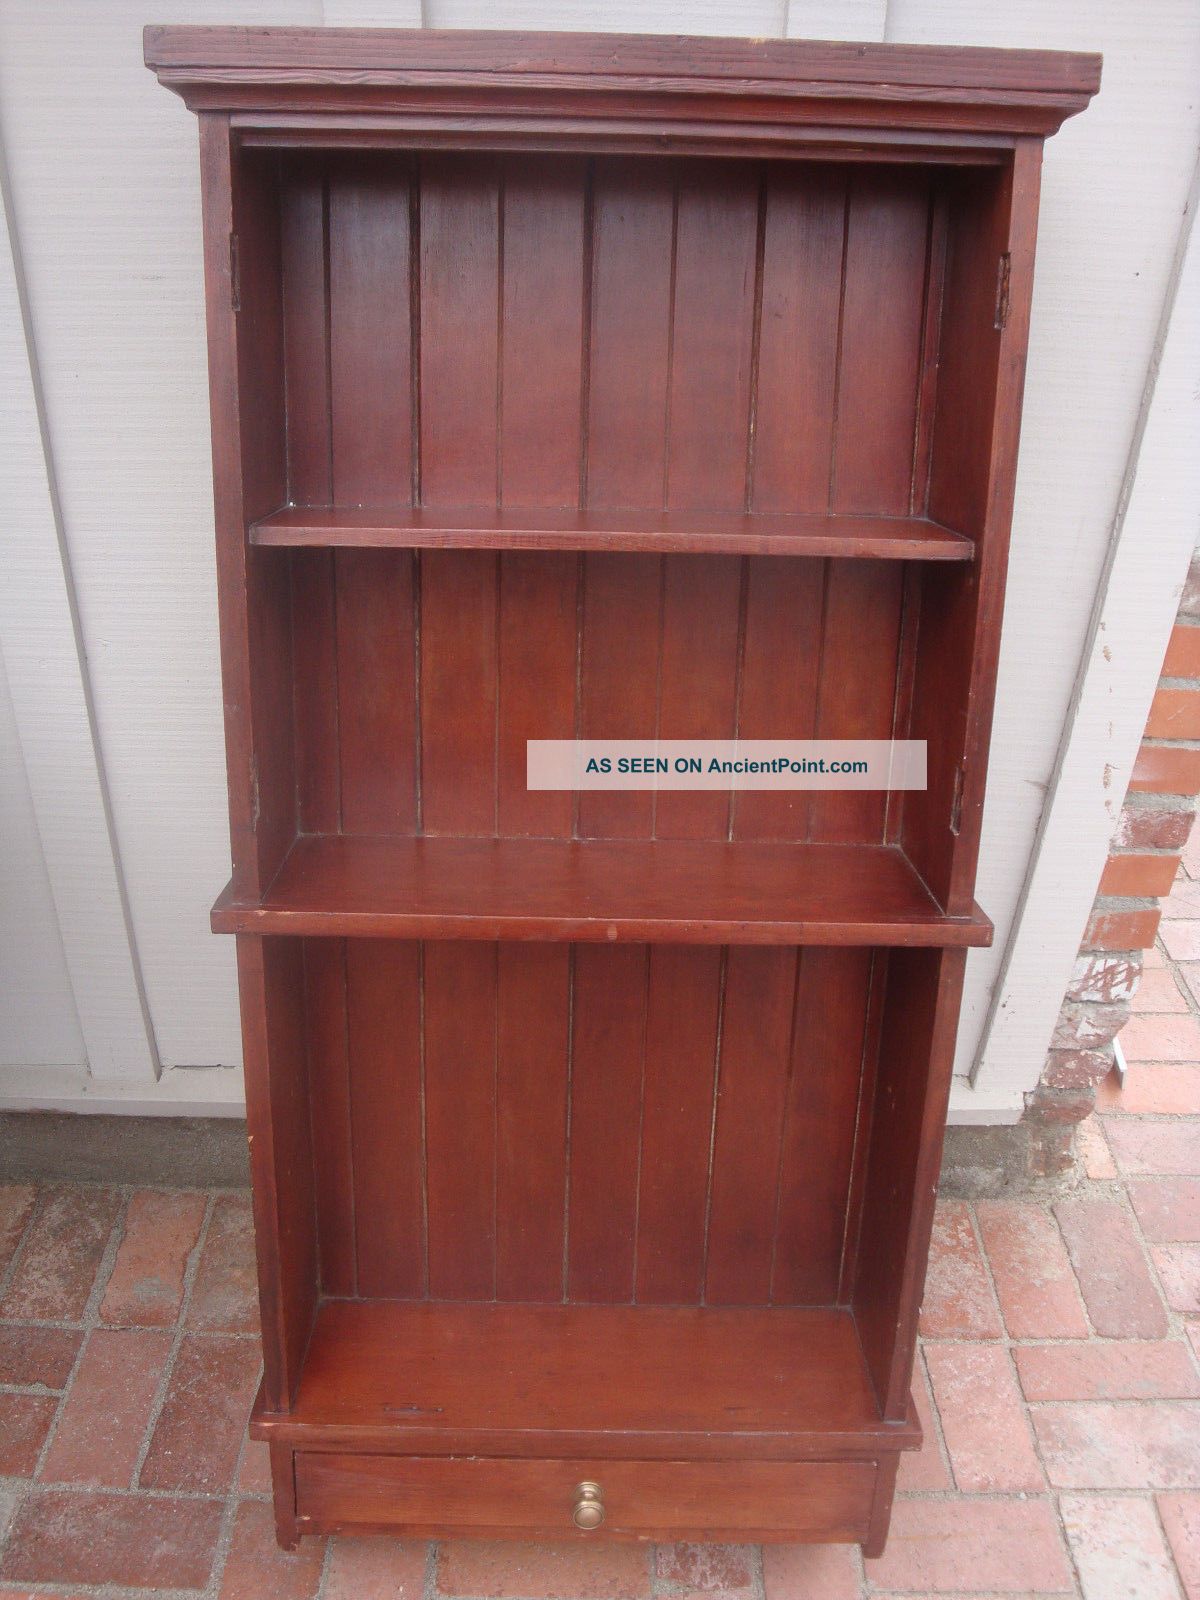 Antique Shelving/cupboard From Demolished Hotel Downtown San Diego 1900-1950 photo